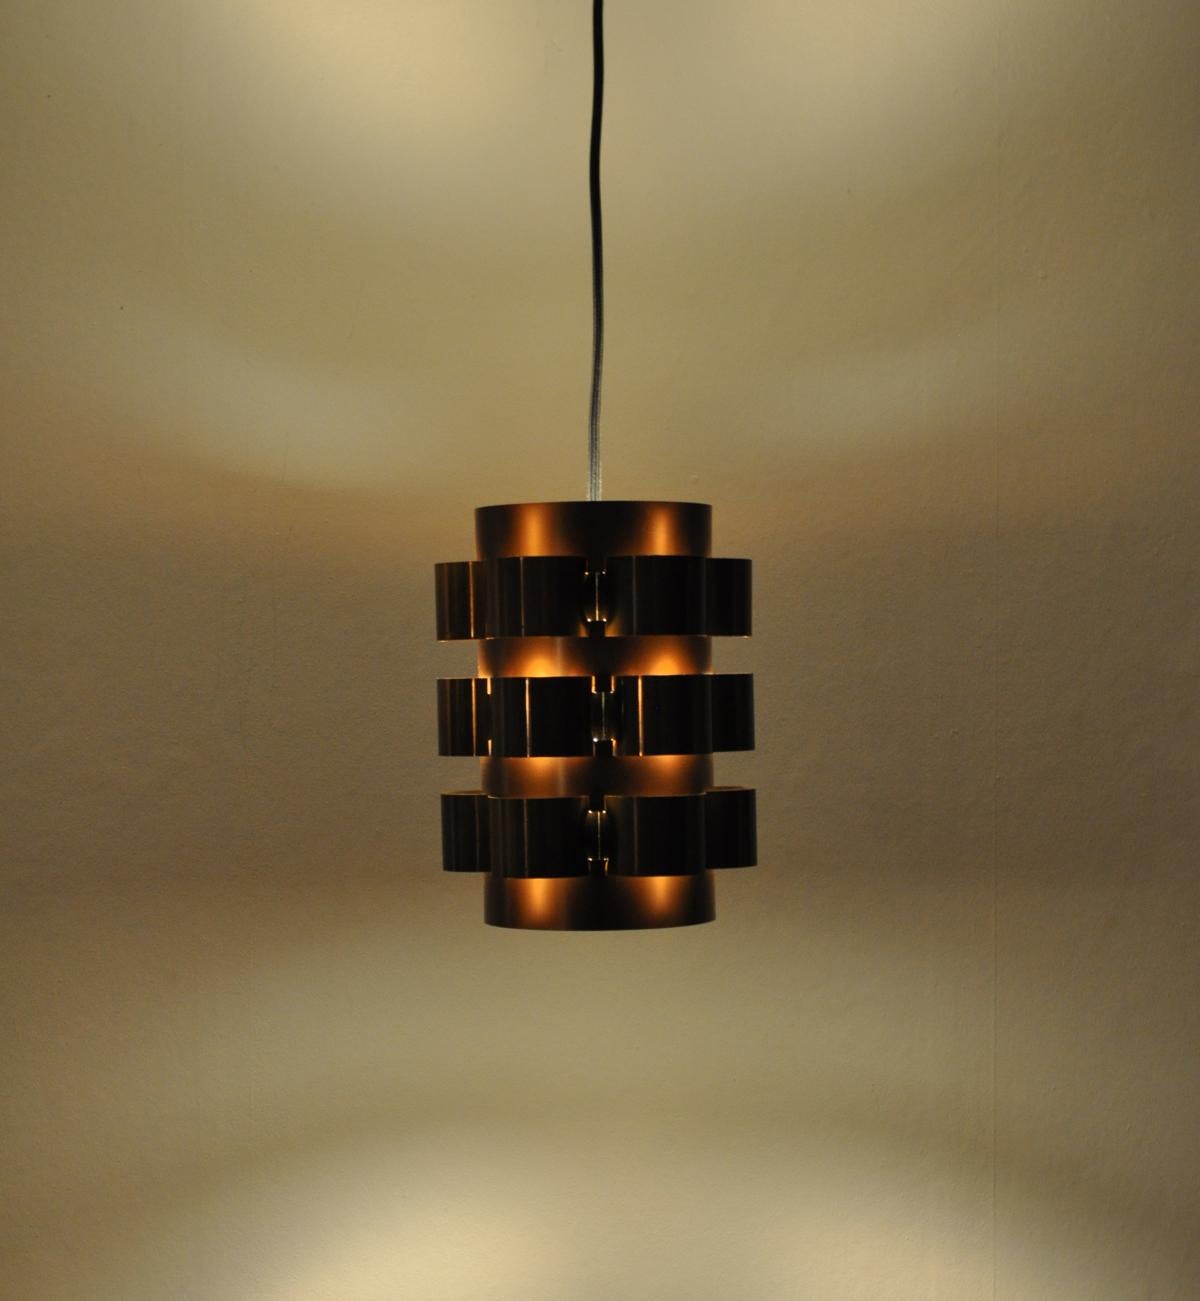 Danish Lamp with Patinated Brass Elements, Design by Werner Schou for Coronell 2